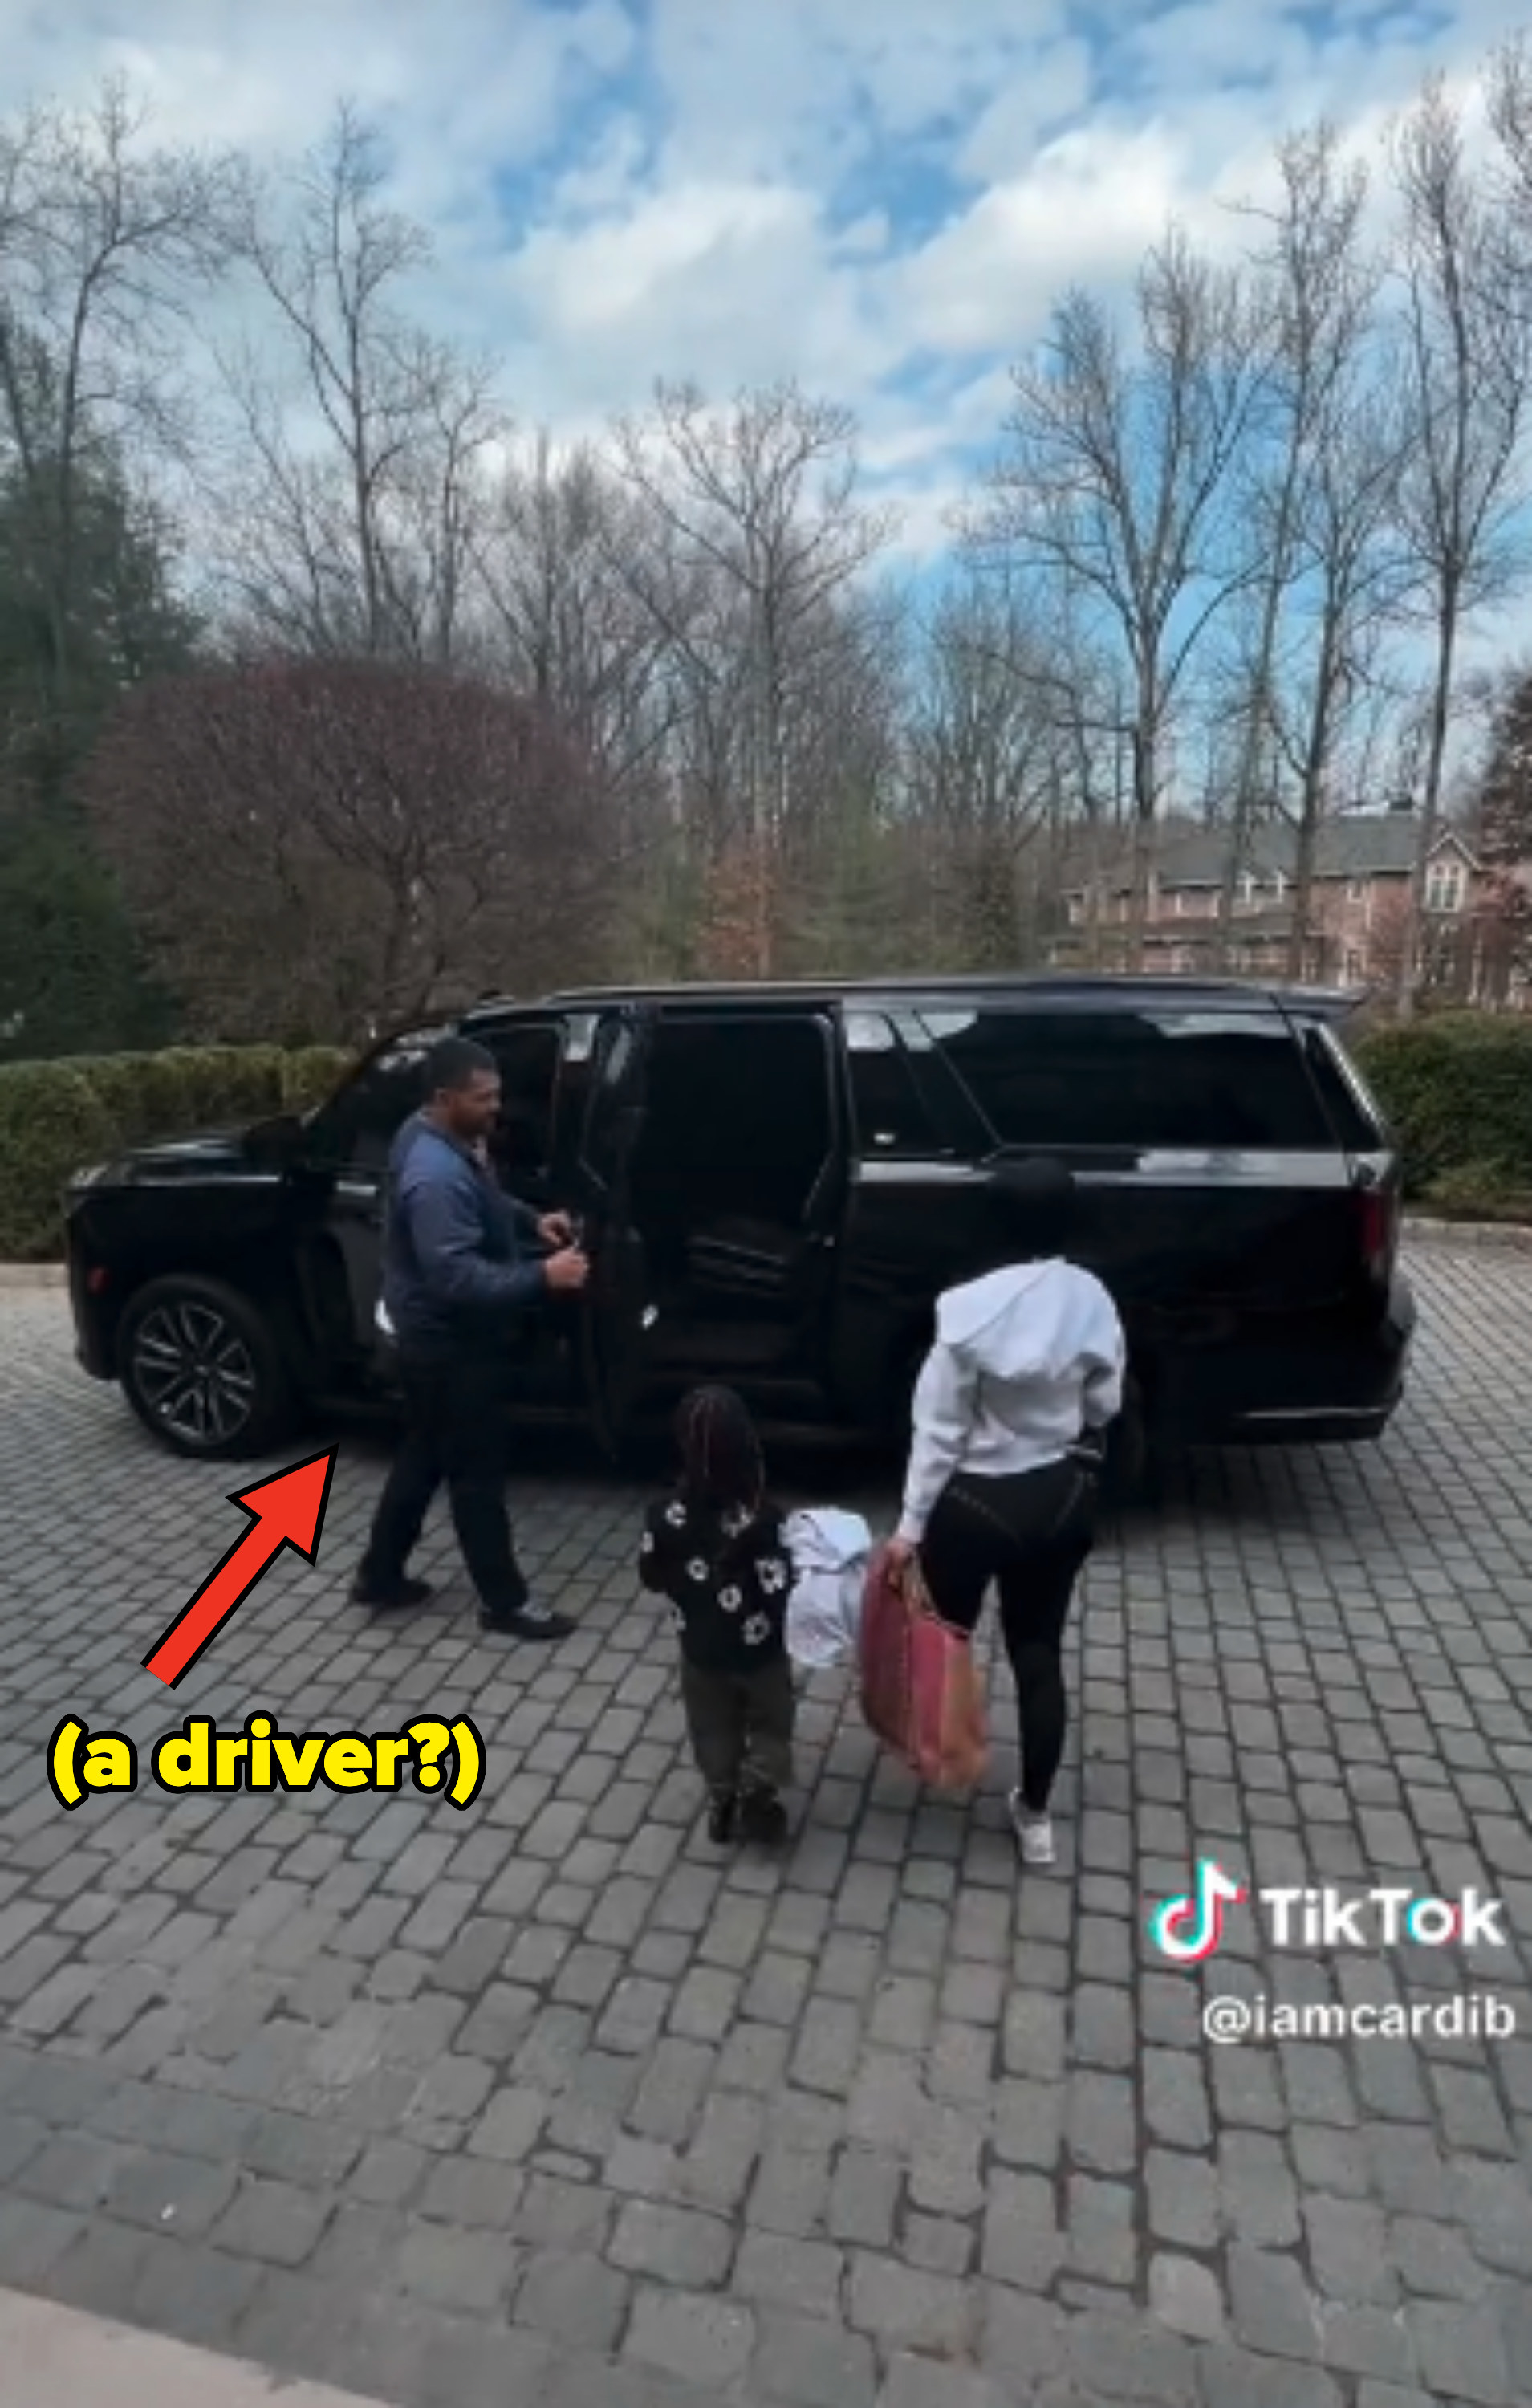 As Cardi approaches an SUV with her child next to her, an arrow points out that she has a personal driver